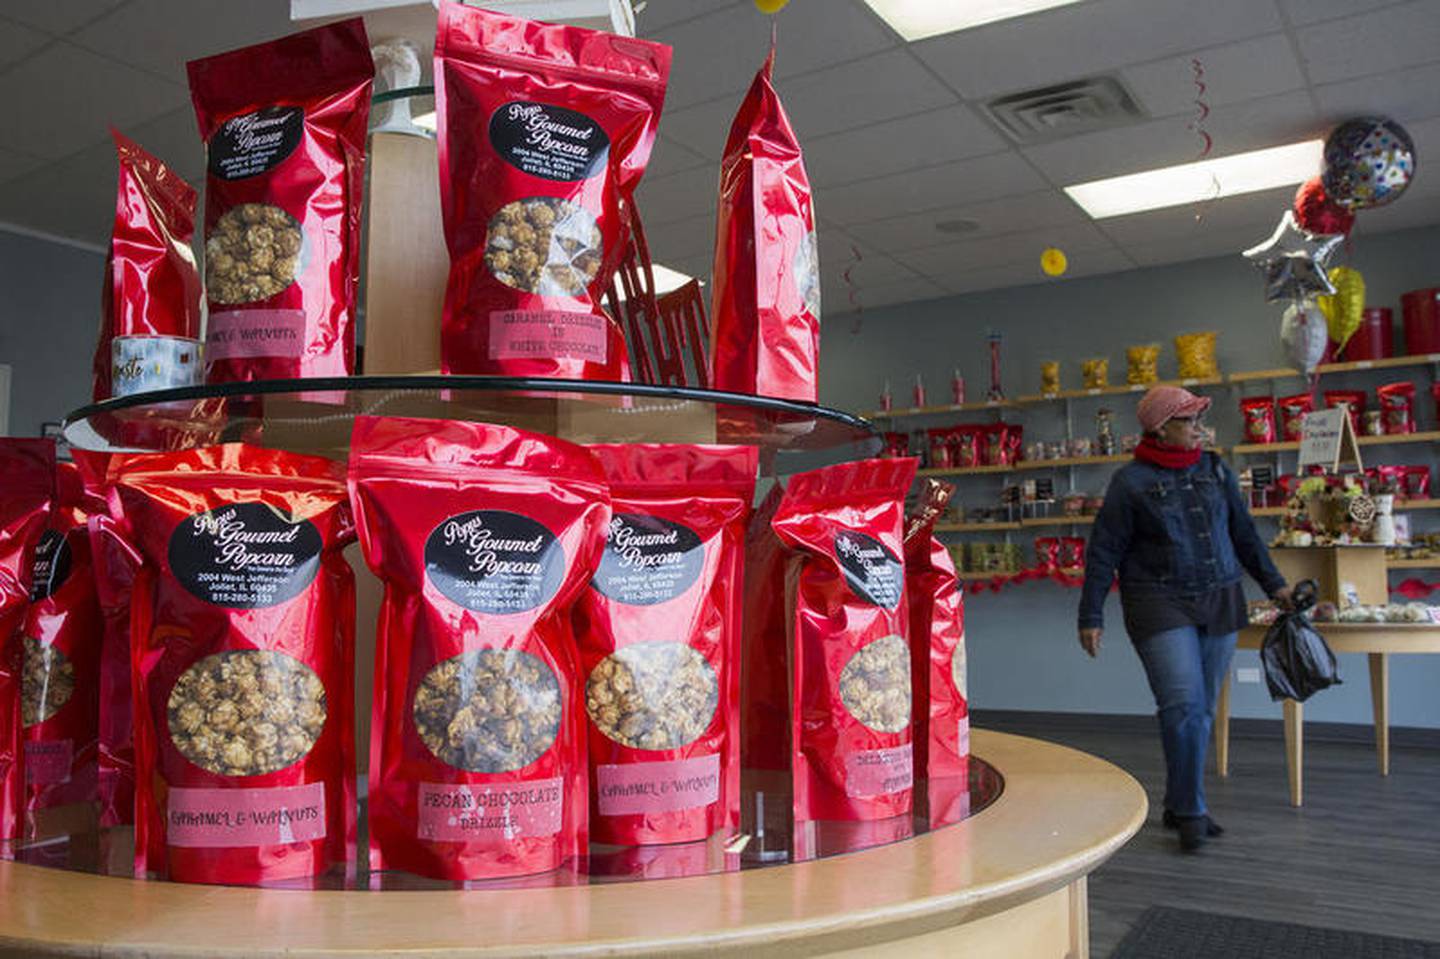 Customers file in and out of Popus Gourmet Popcorn with Thanksgiving treats on Wednesday, Nov. 21, 2018, at Popus Gourmet Popcorn, in Joliet, Ill. Popus Gourmet Popcorn is one of the thousands of business across the nation participating is Small Business Saturday, an annual shopping holiday designed to celebrate and help discover small businesses.